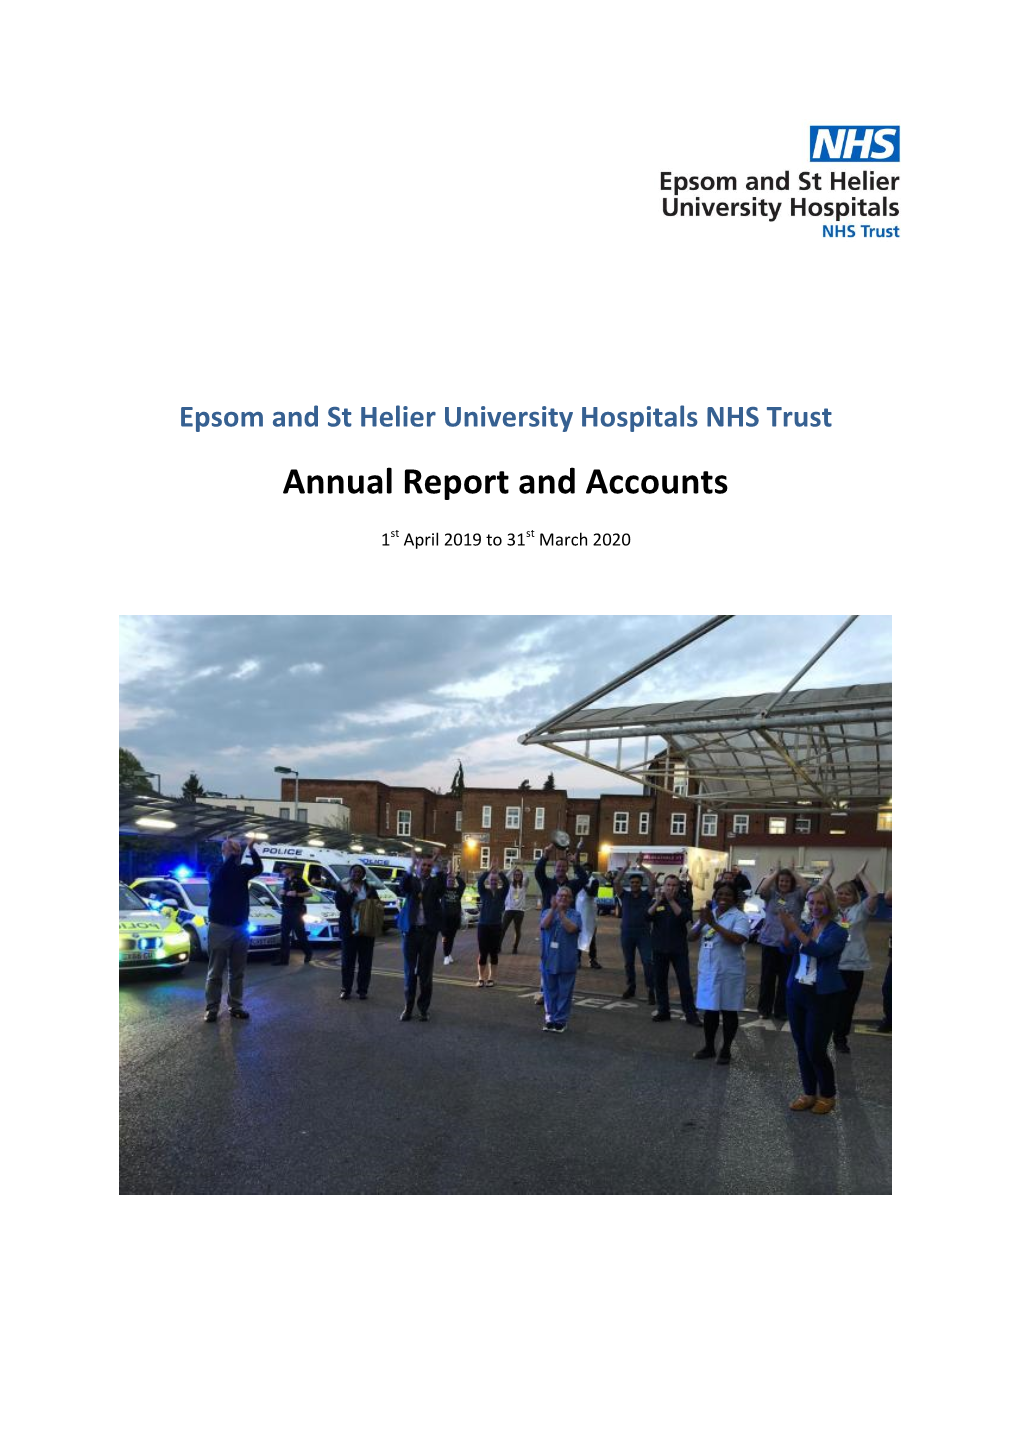 Epsom and St Helier University Hospitals NHS Trust: Annual Report and Accounts 2019/20